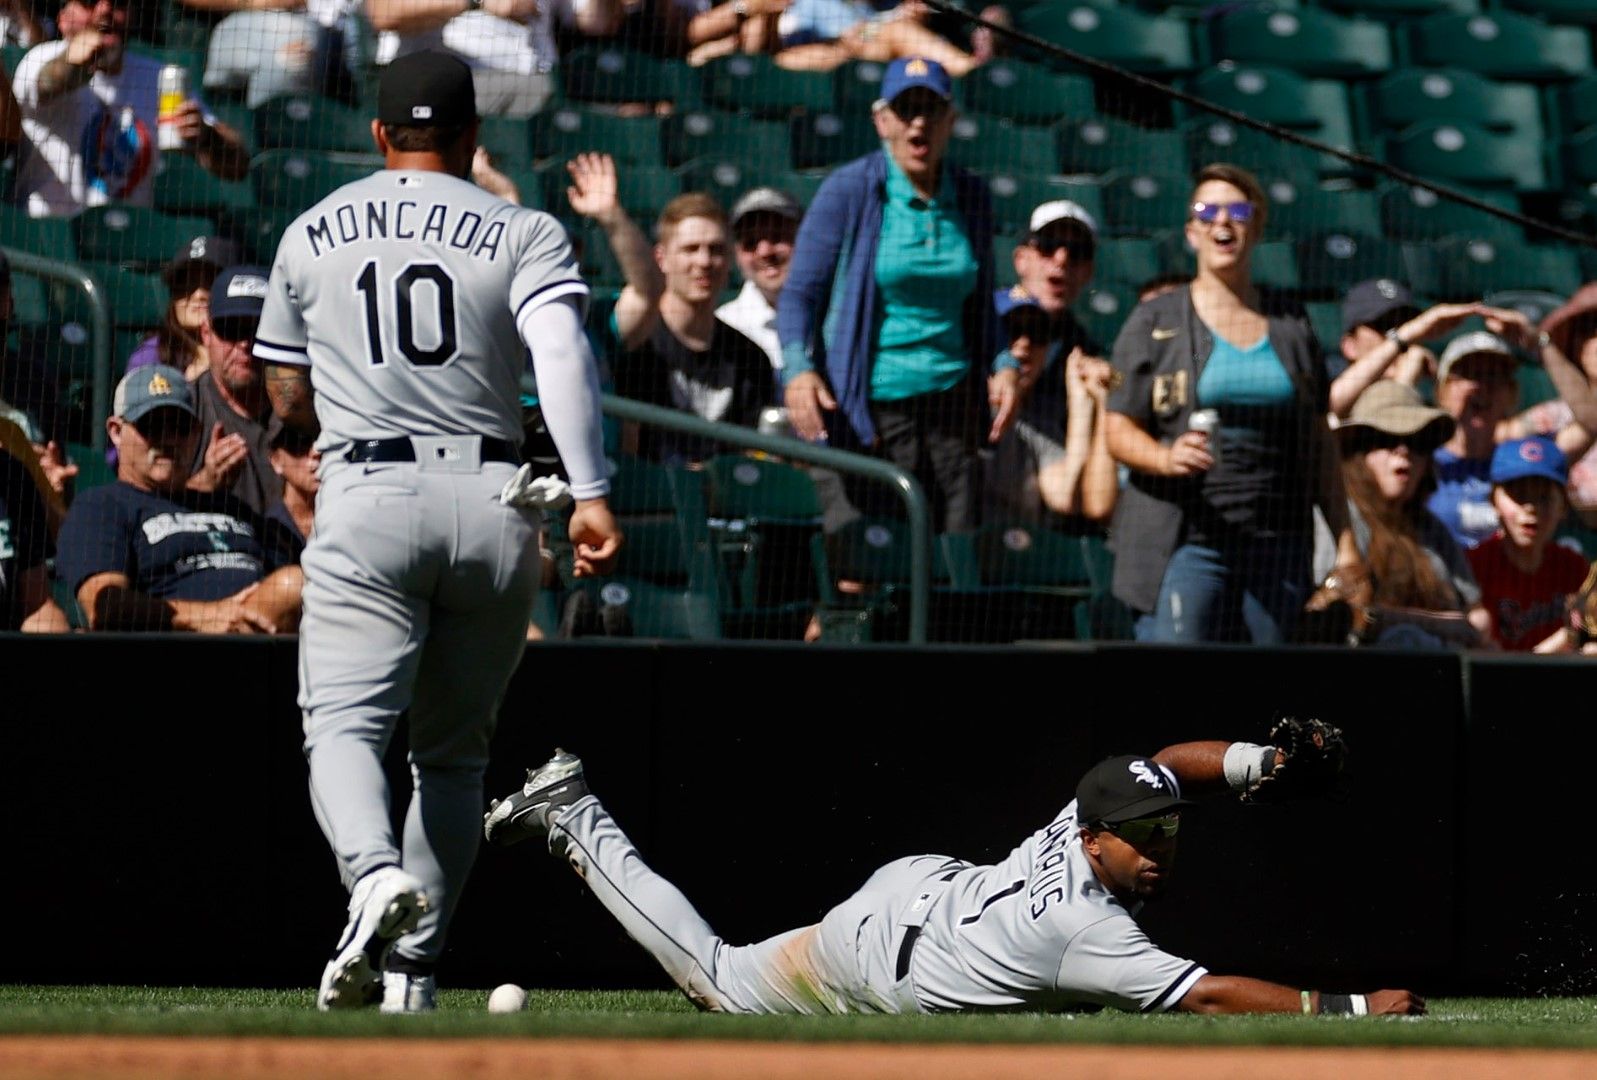 Gilbert ties high with 9 strikeouts, M's beat White Sox 3-0